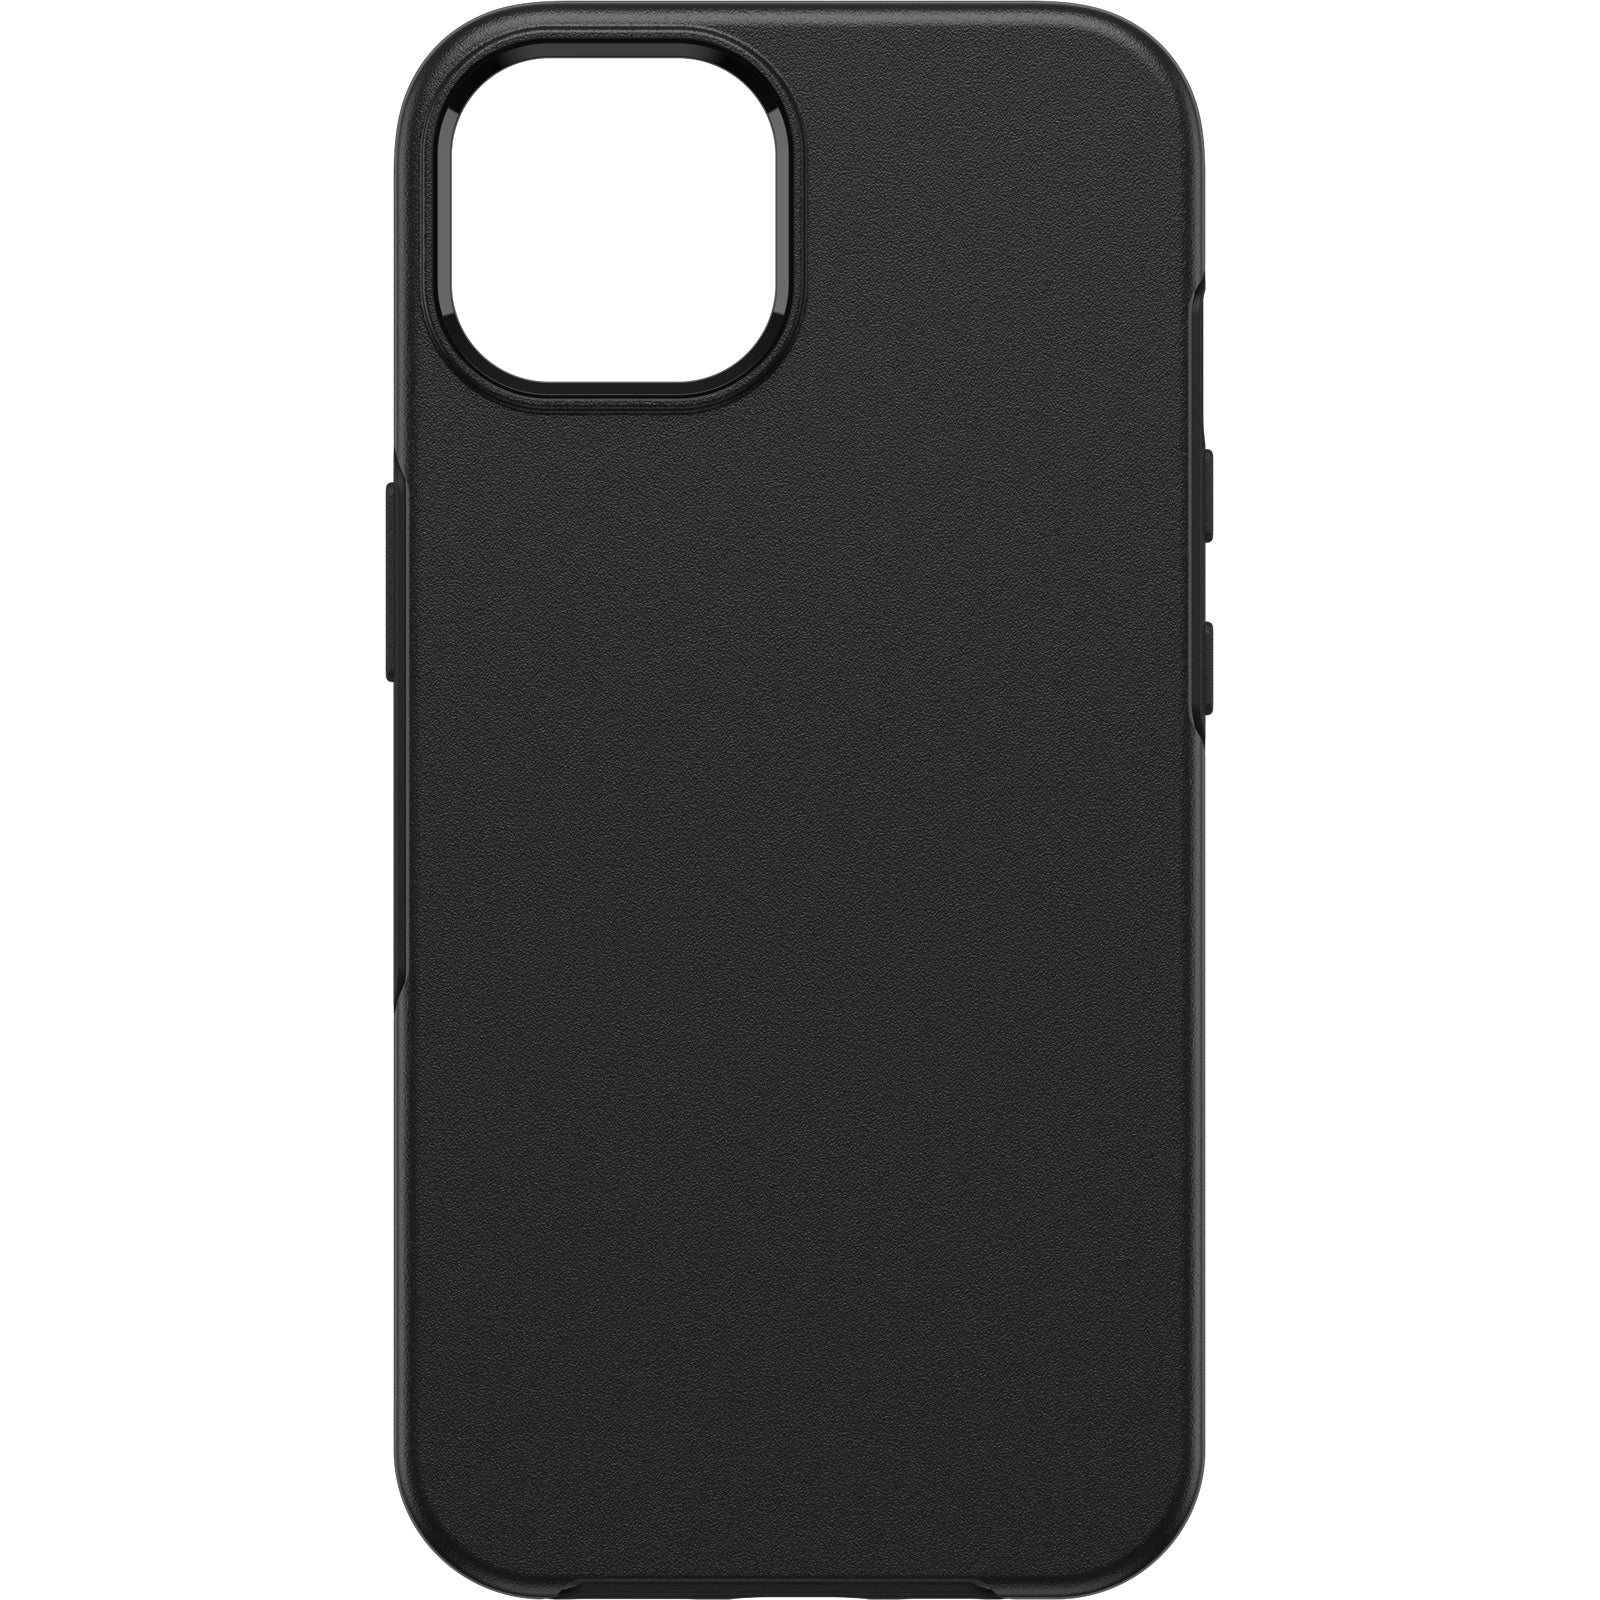 OTTERBOX SEE CASE WITH MAGSAFE FOR APPLE iPHONE 13 - Black(77-85689) - Screenless front, Works with MagSafe chargers and accessories